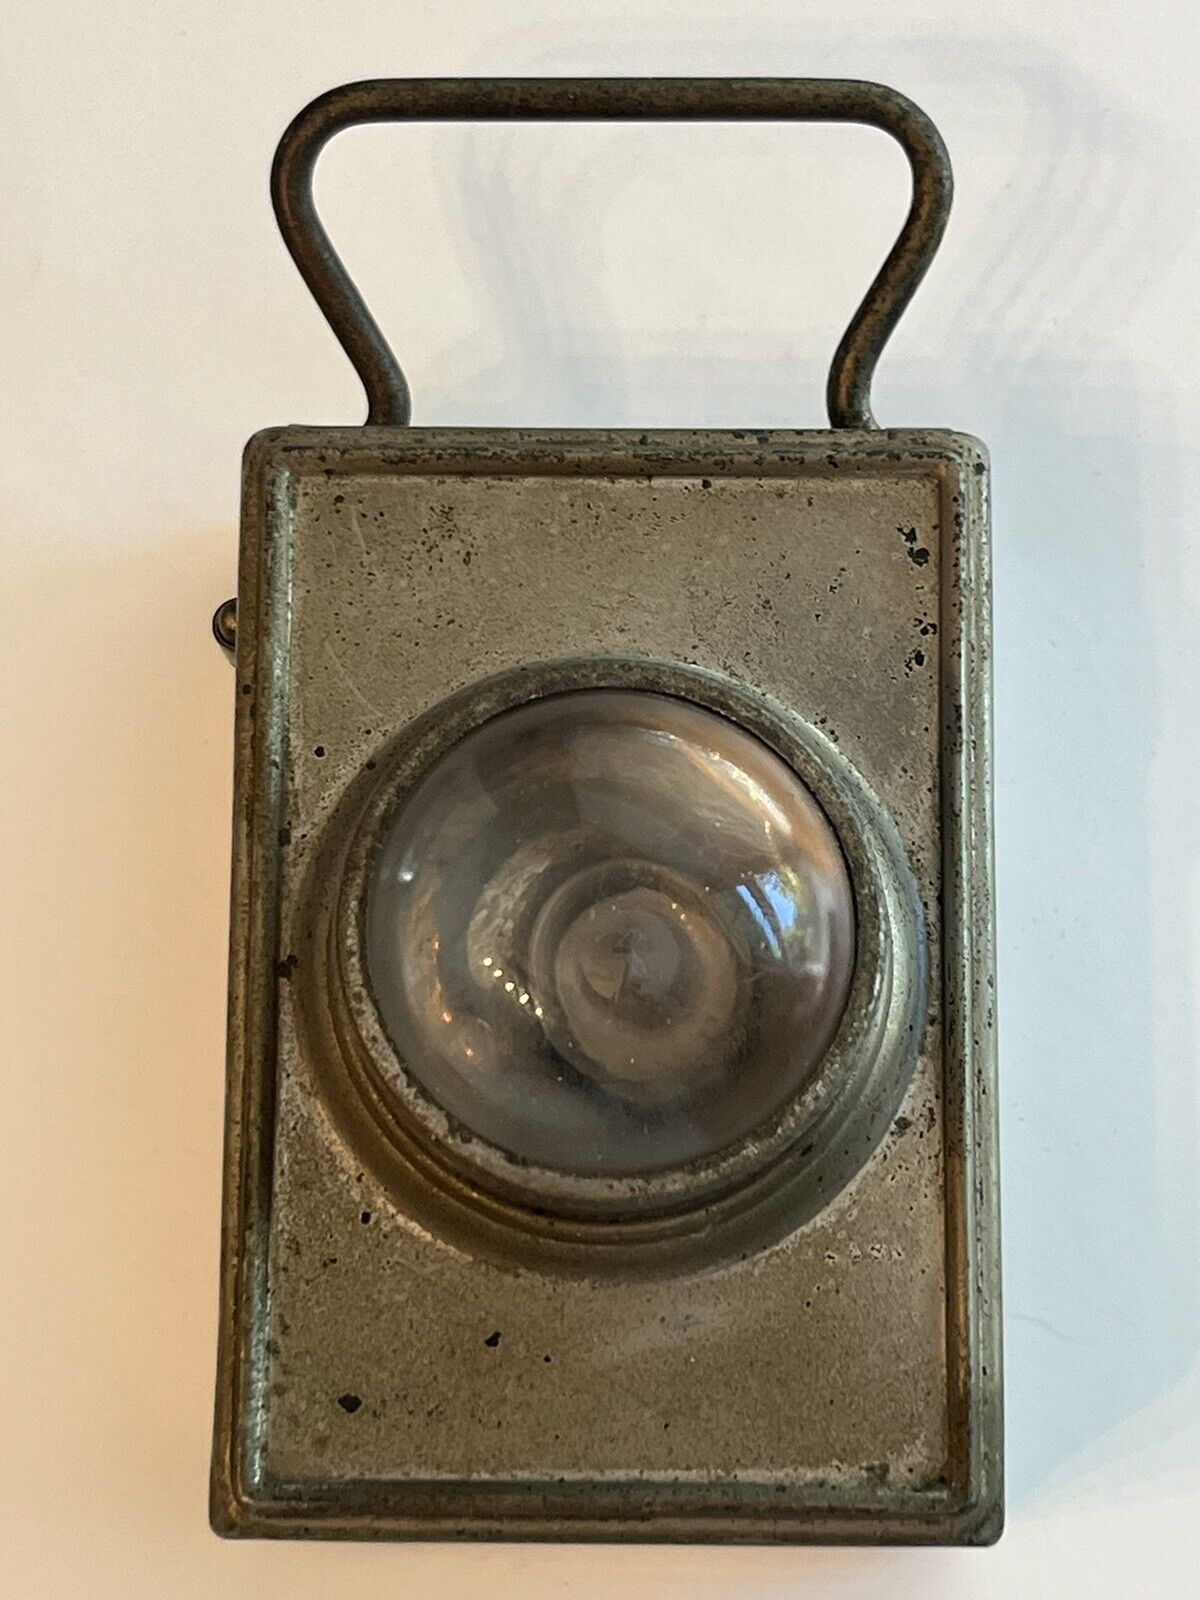 VERY RARE EARLY 1900s ANTIQUE EVEREADY PLATED SMALL SQUARE FLASHLIGHT 👀 LQQK 👀